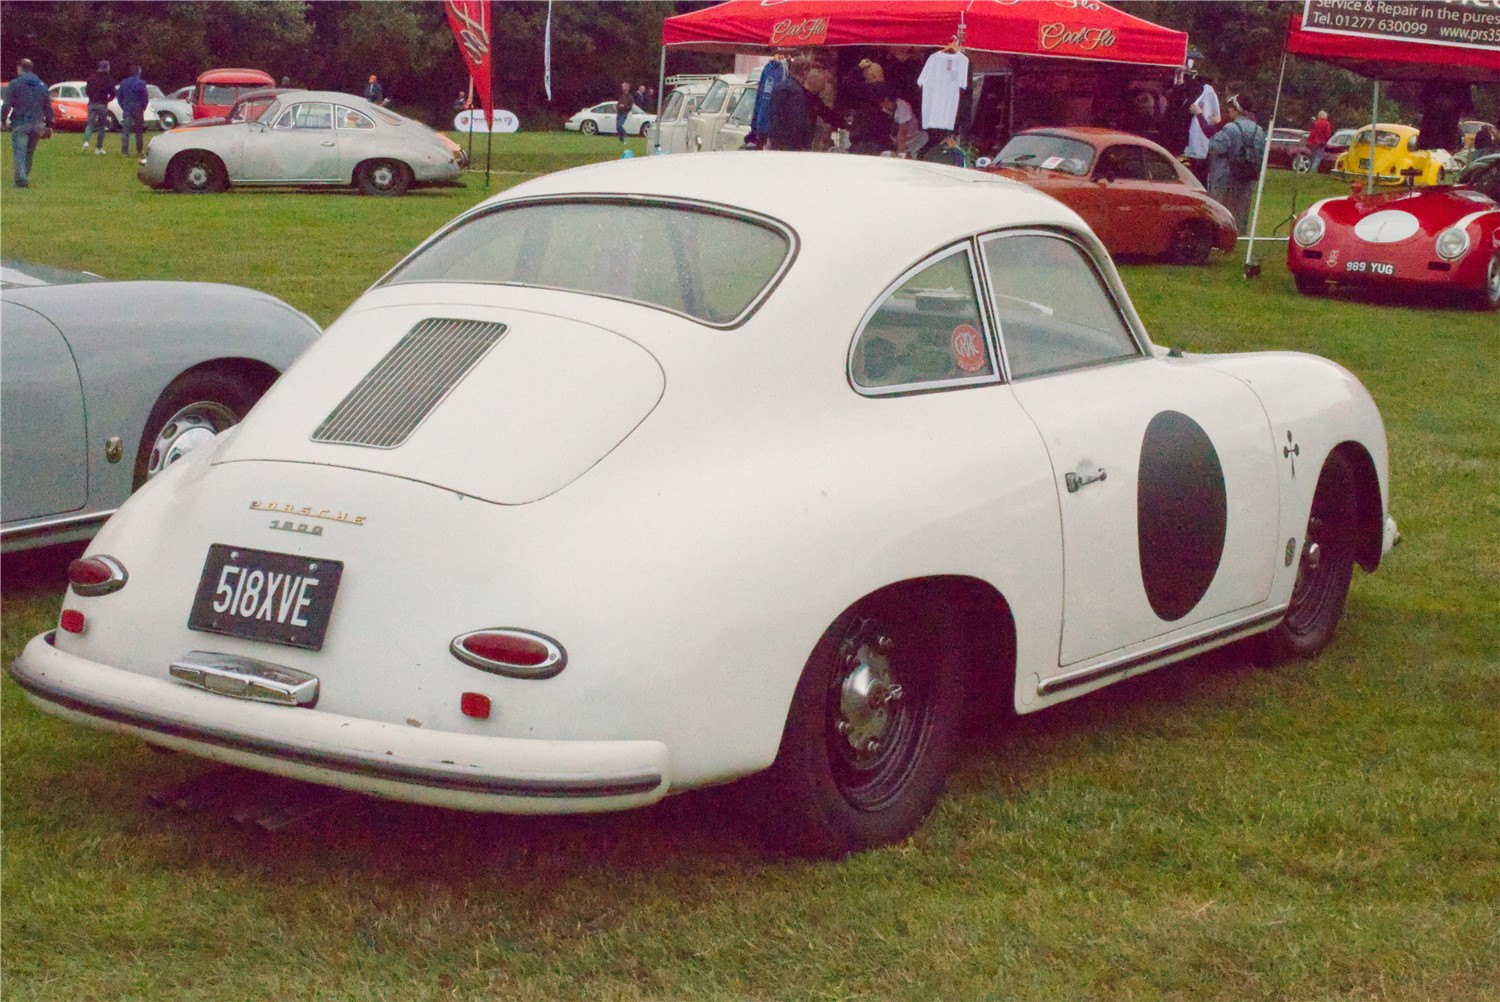 Outlaw style Porsche 356 at Classics at the Clubhouse - Aircooled Edition